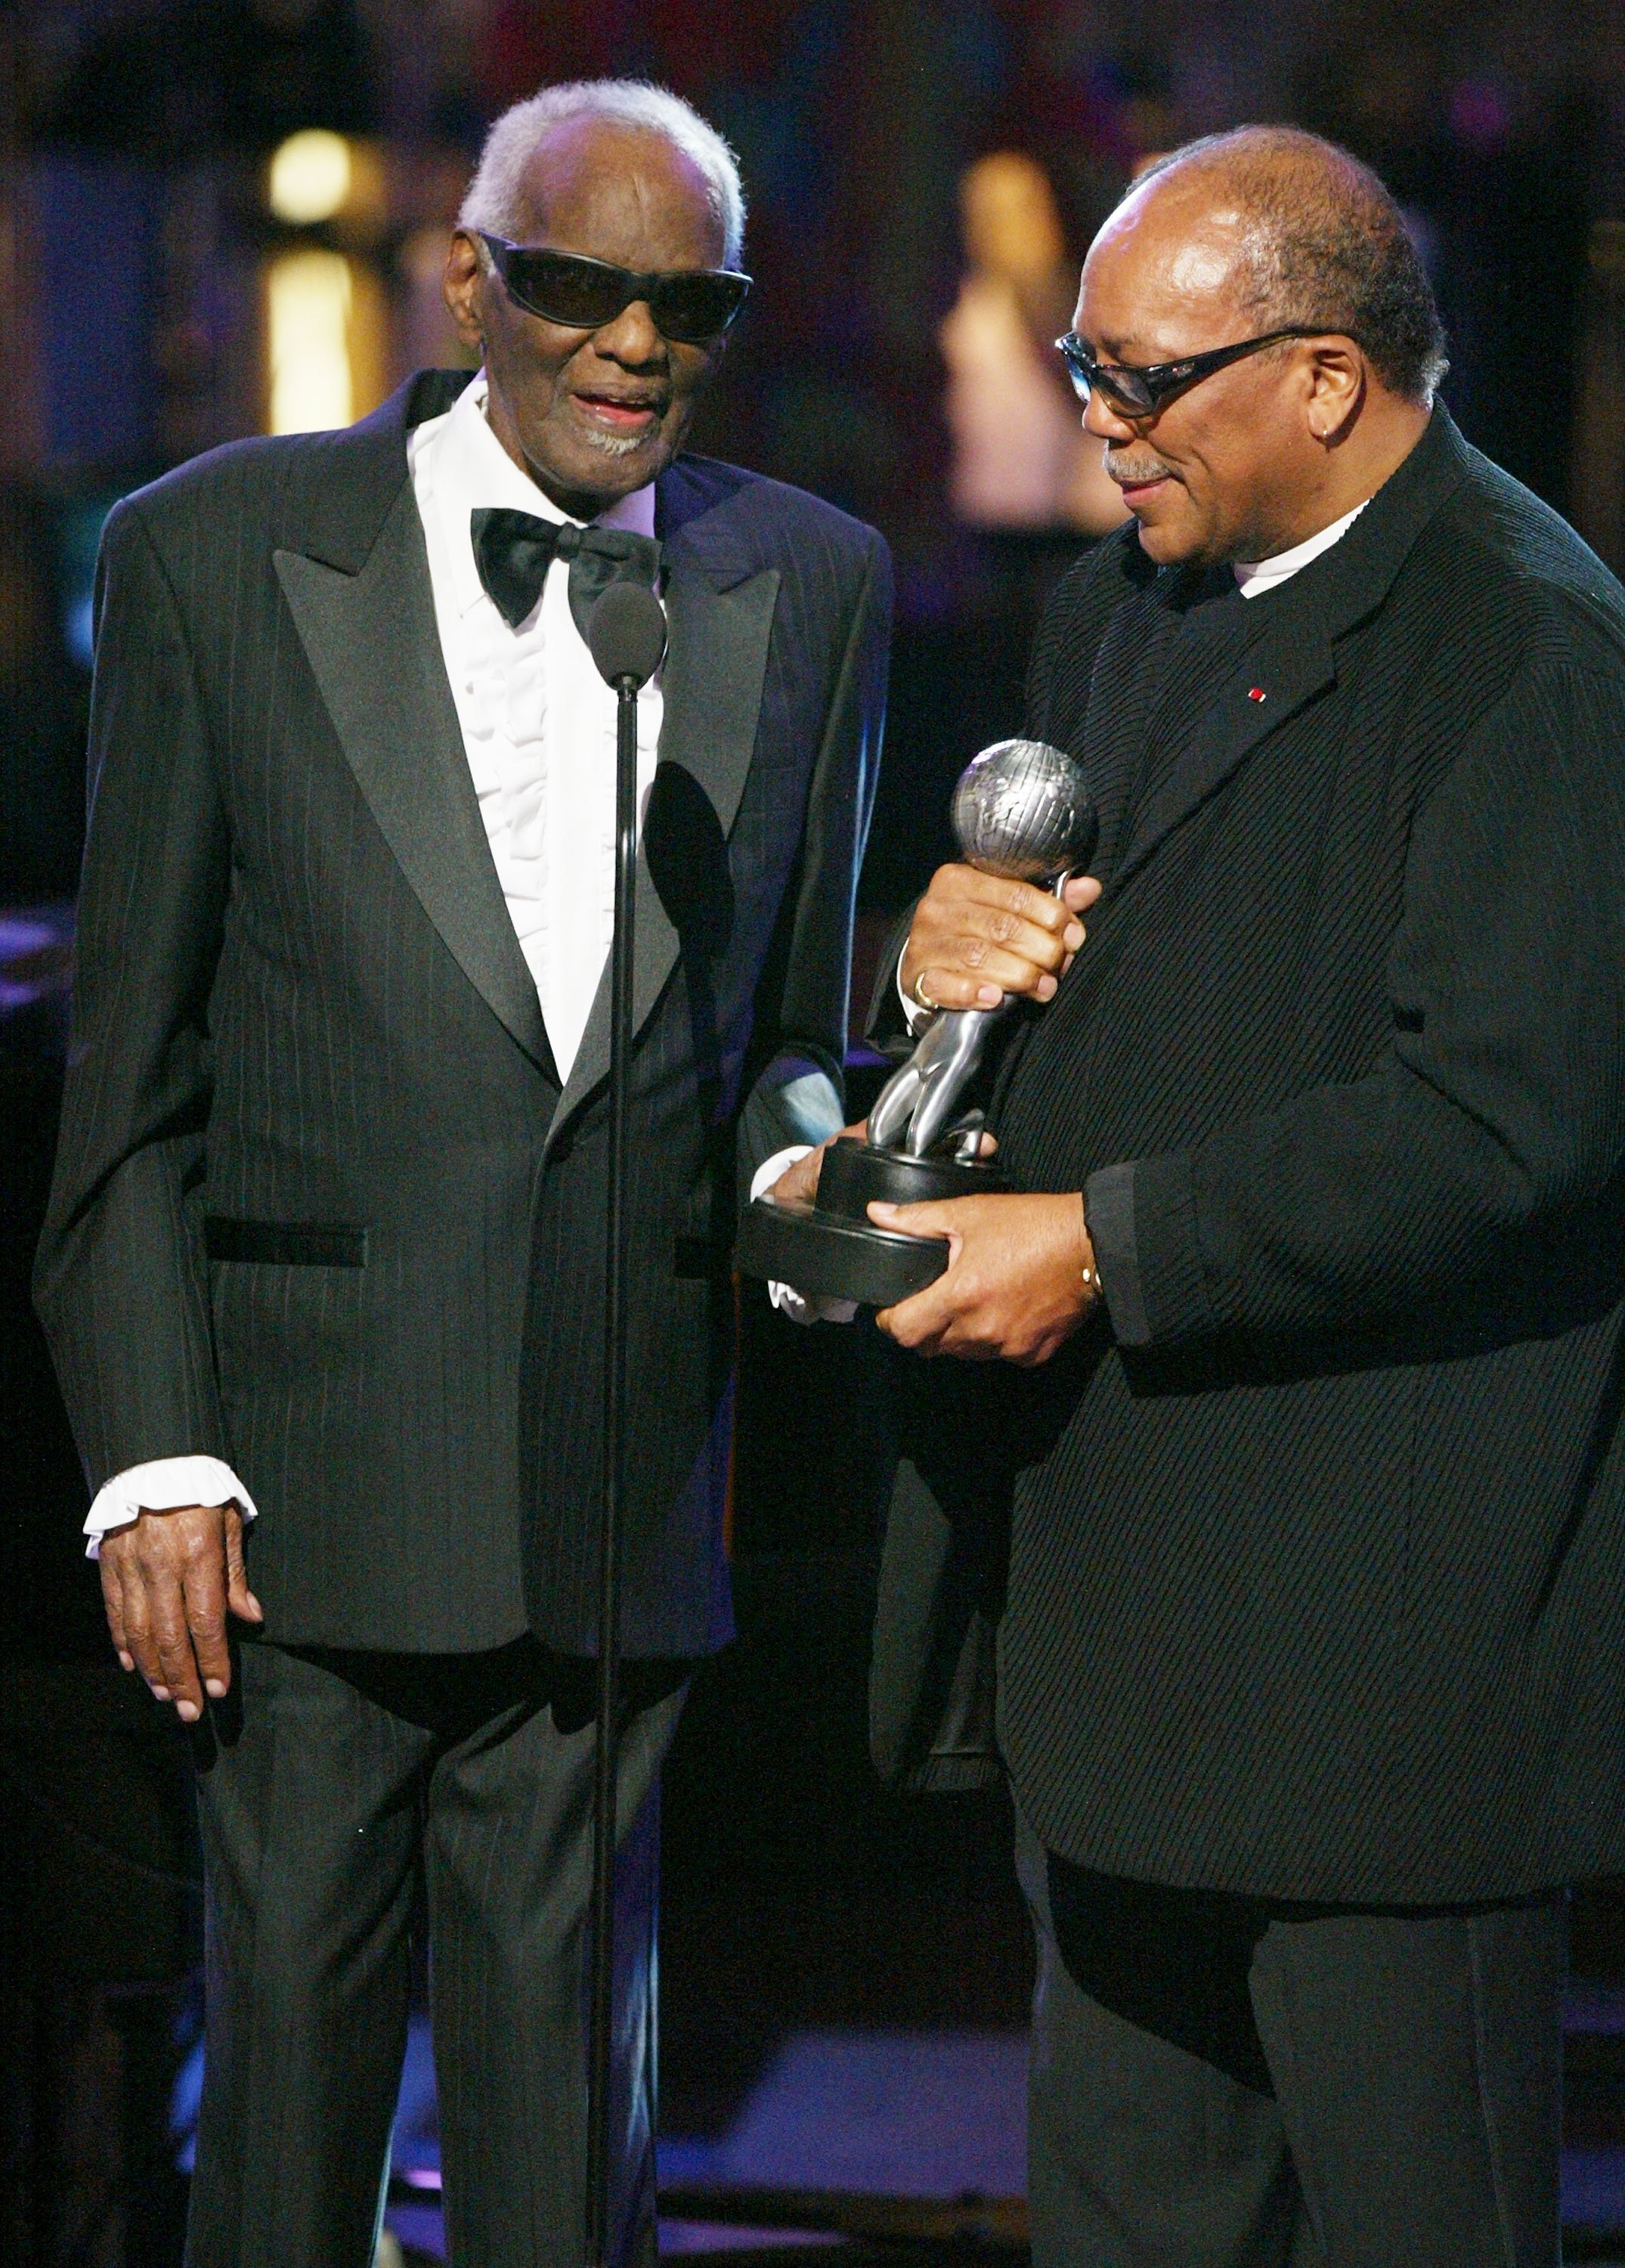 Ray Charles and Quincy Jones at the 35th Annual NAACP Image Awards. March 6, 2004. | Photo: GettyImages